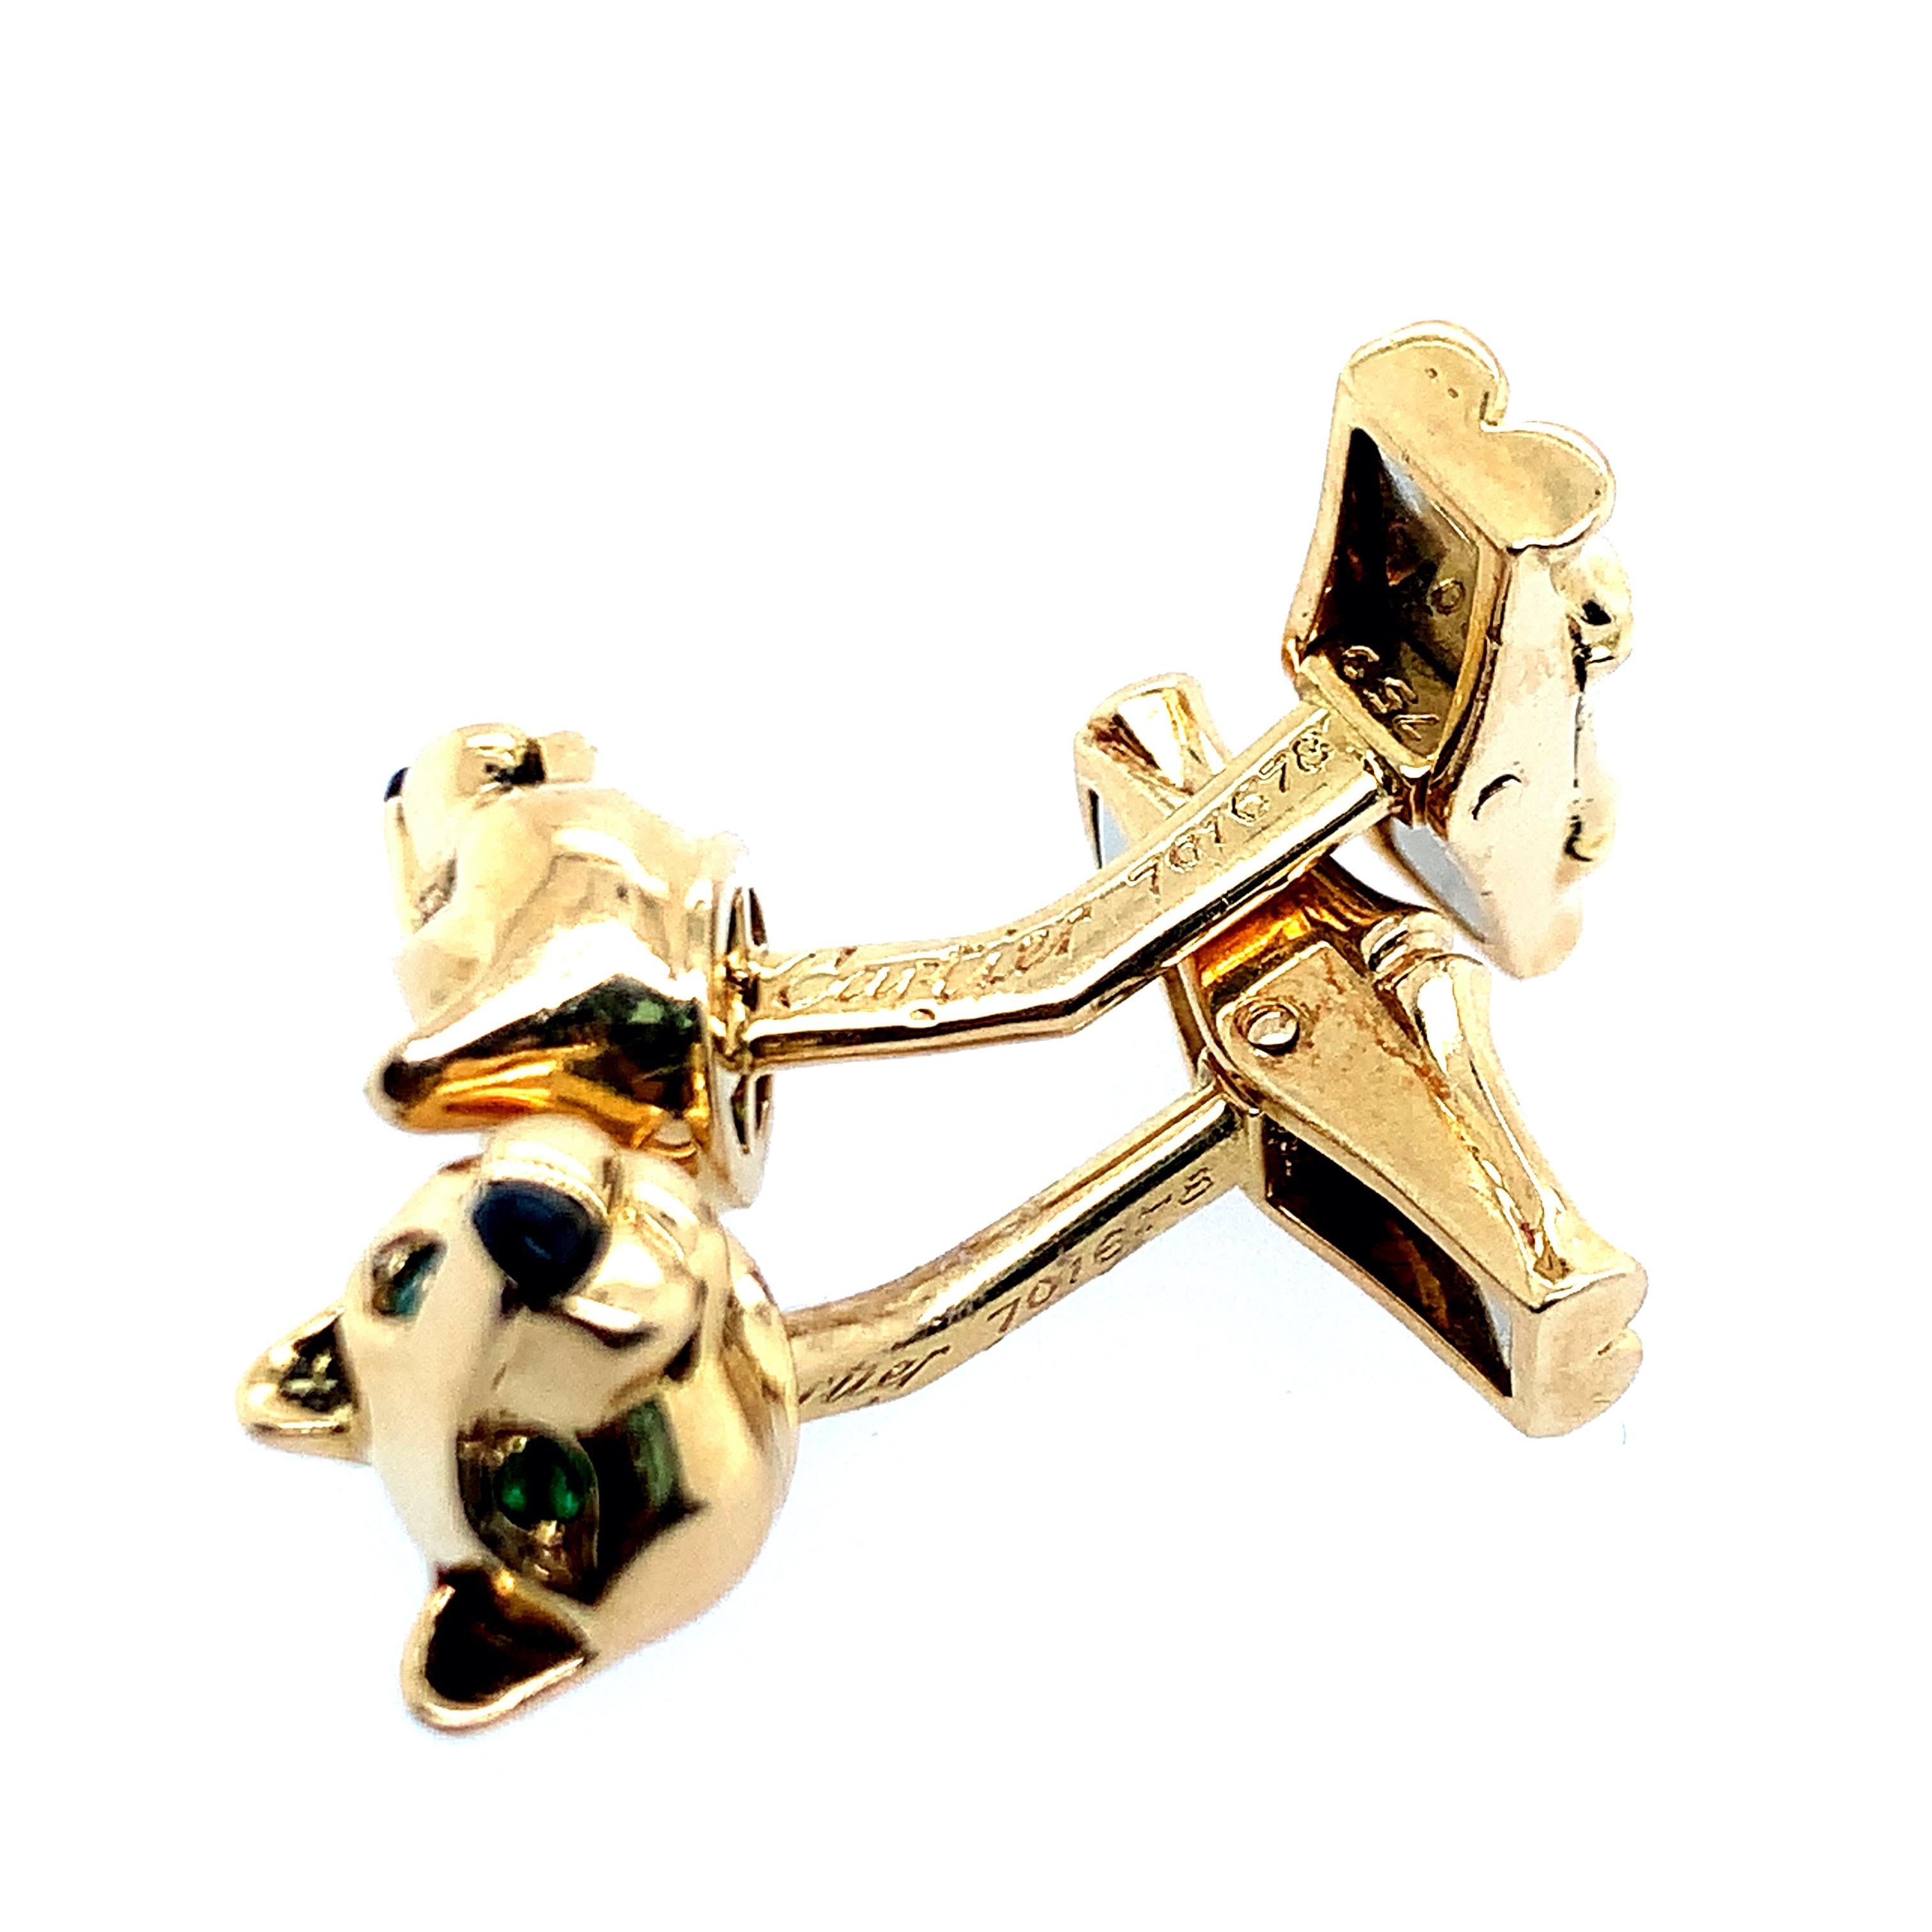 Cartier Panthére Gold Cufflinks In Excellent Condition For Sale In New York, NY